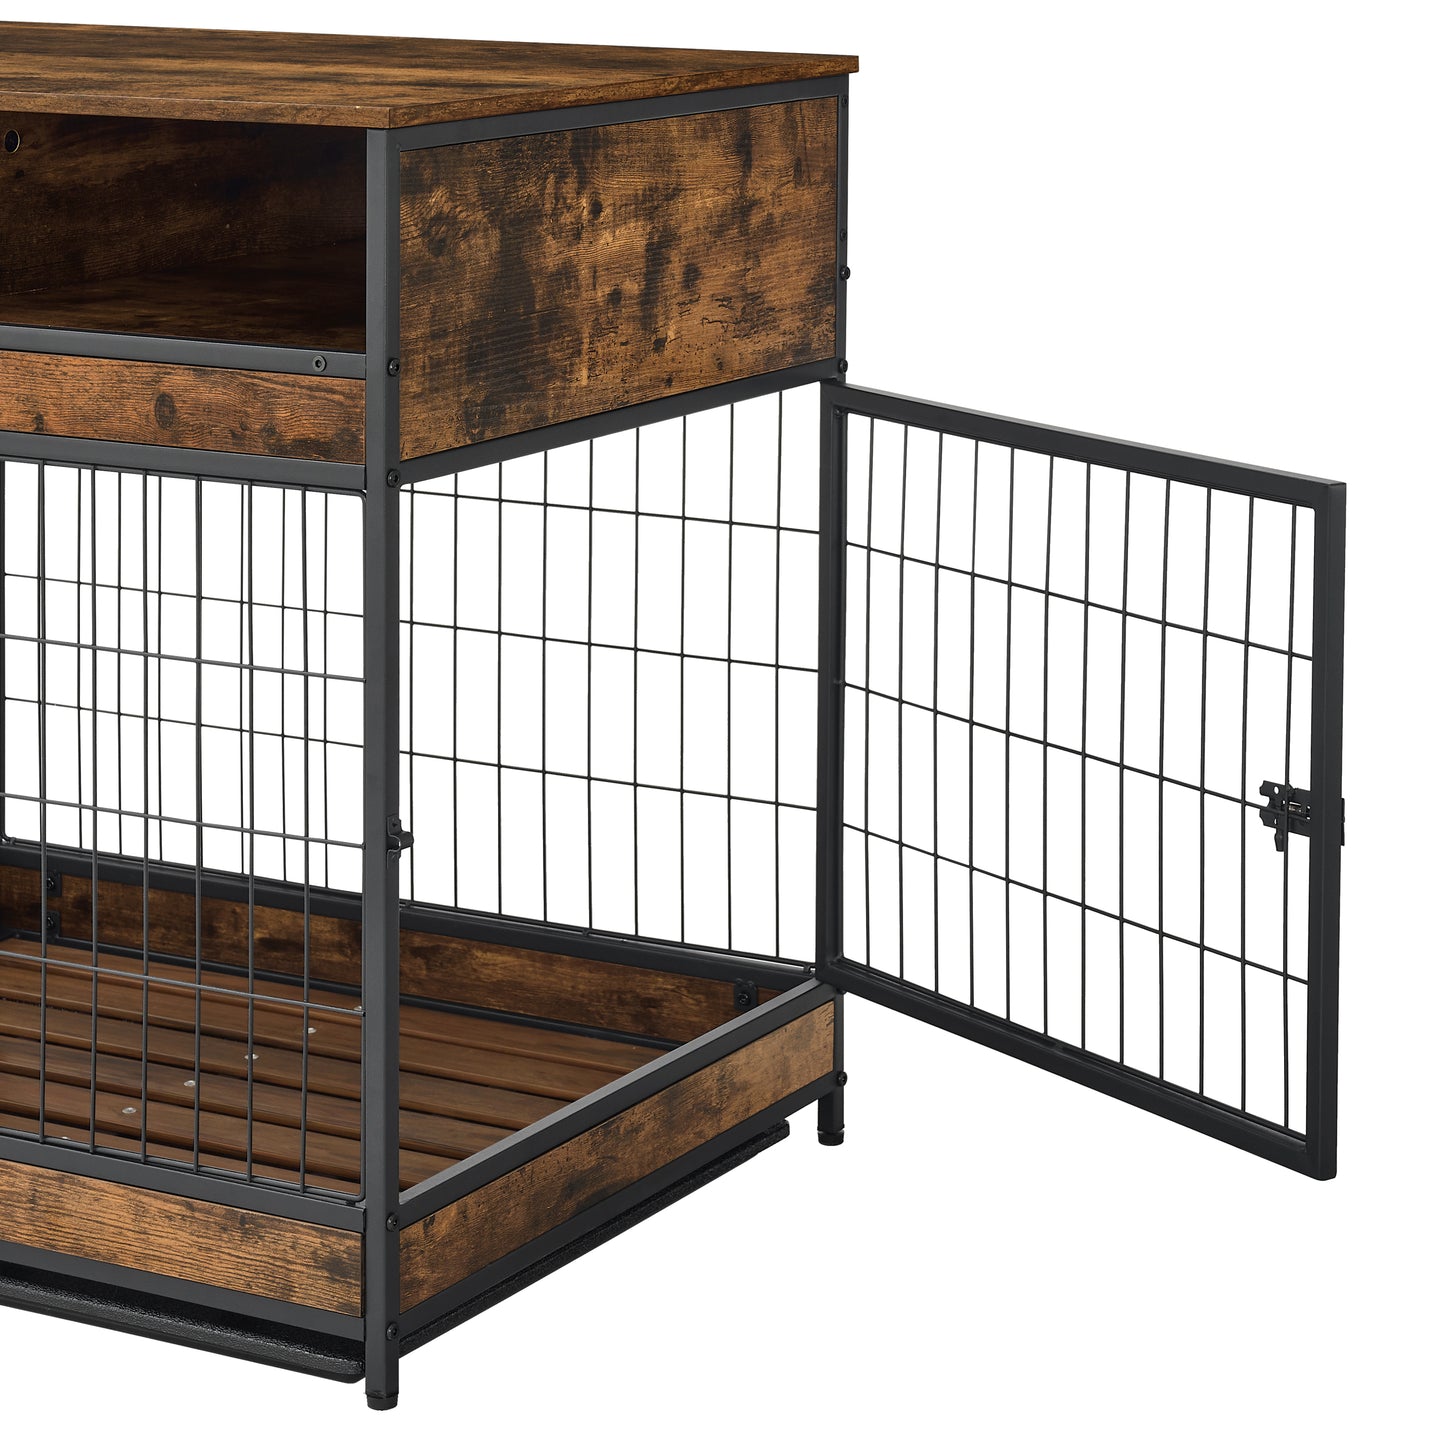 Furniture Dog Cage Crate with Double Doors (Brown) - Ukerr Home